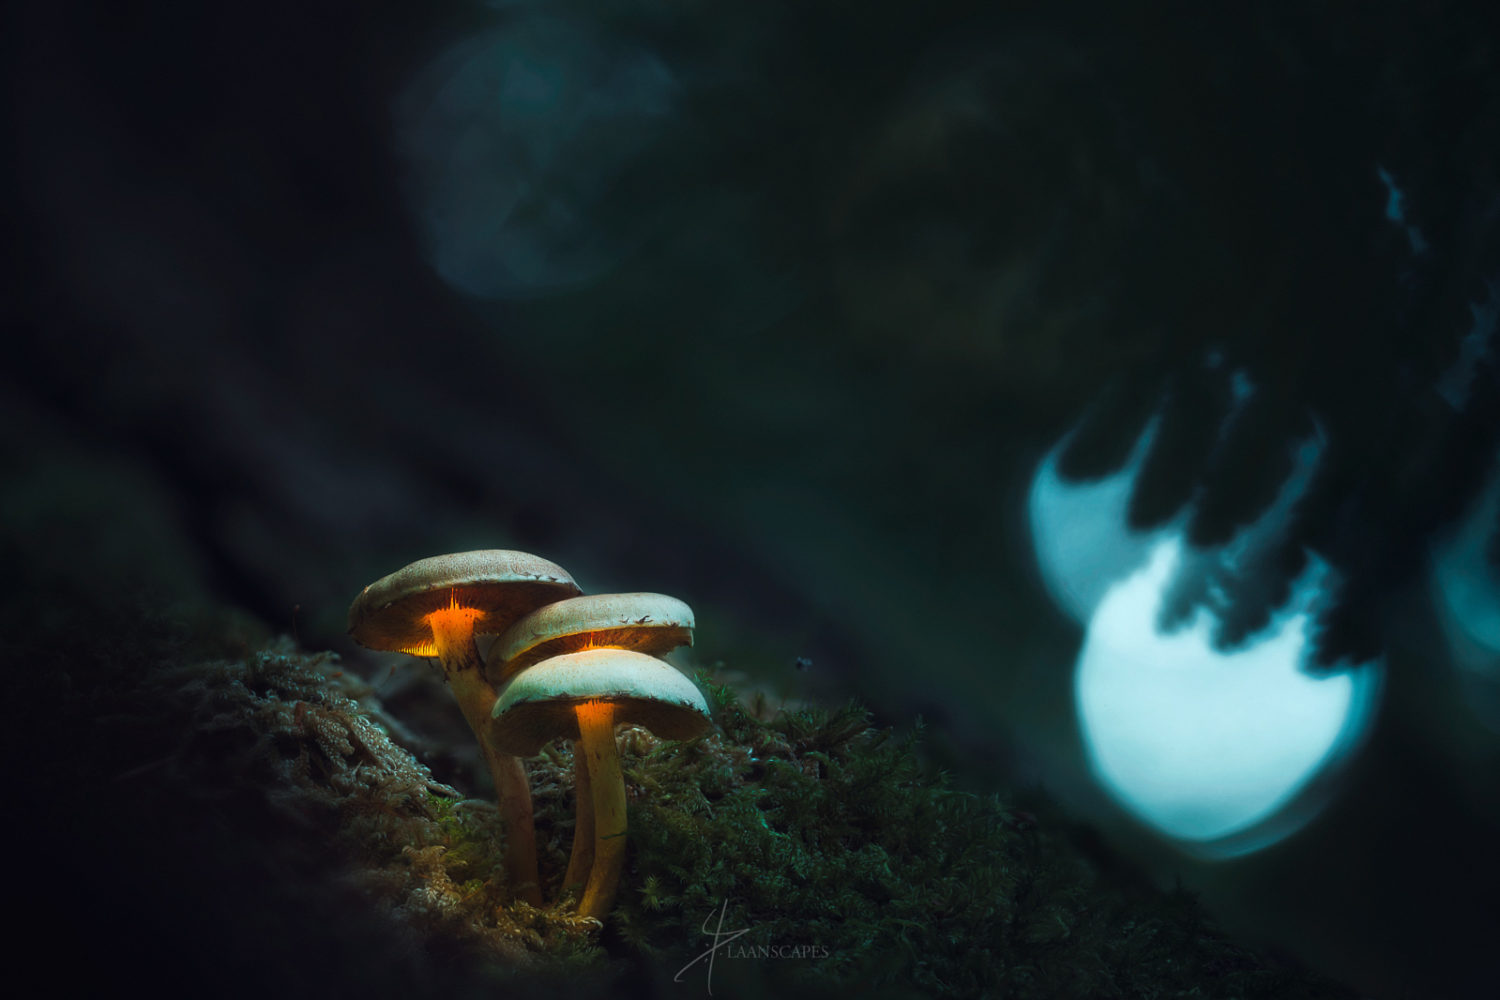 Tutorial: How To Photograph & Process Mushrooms That Glow